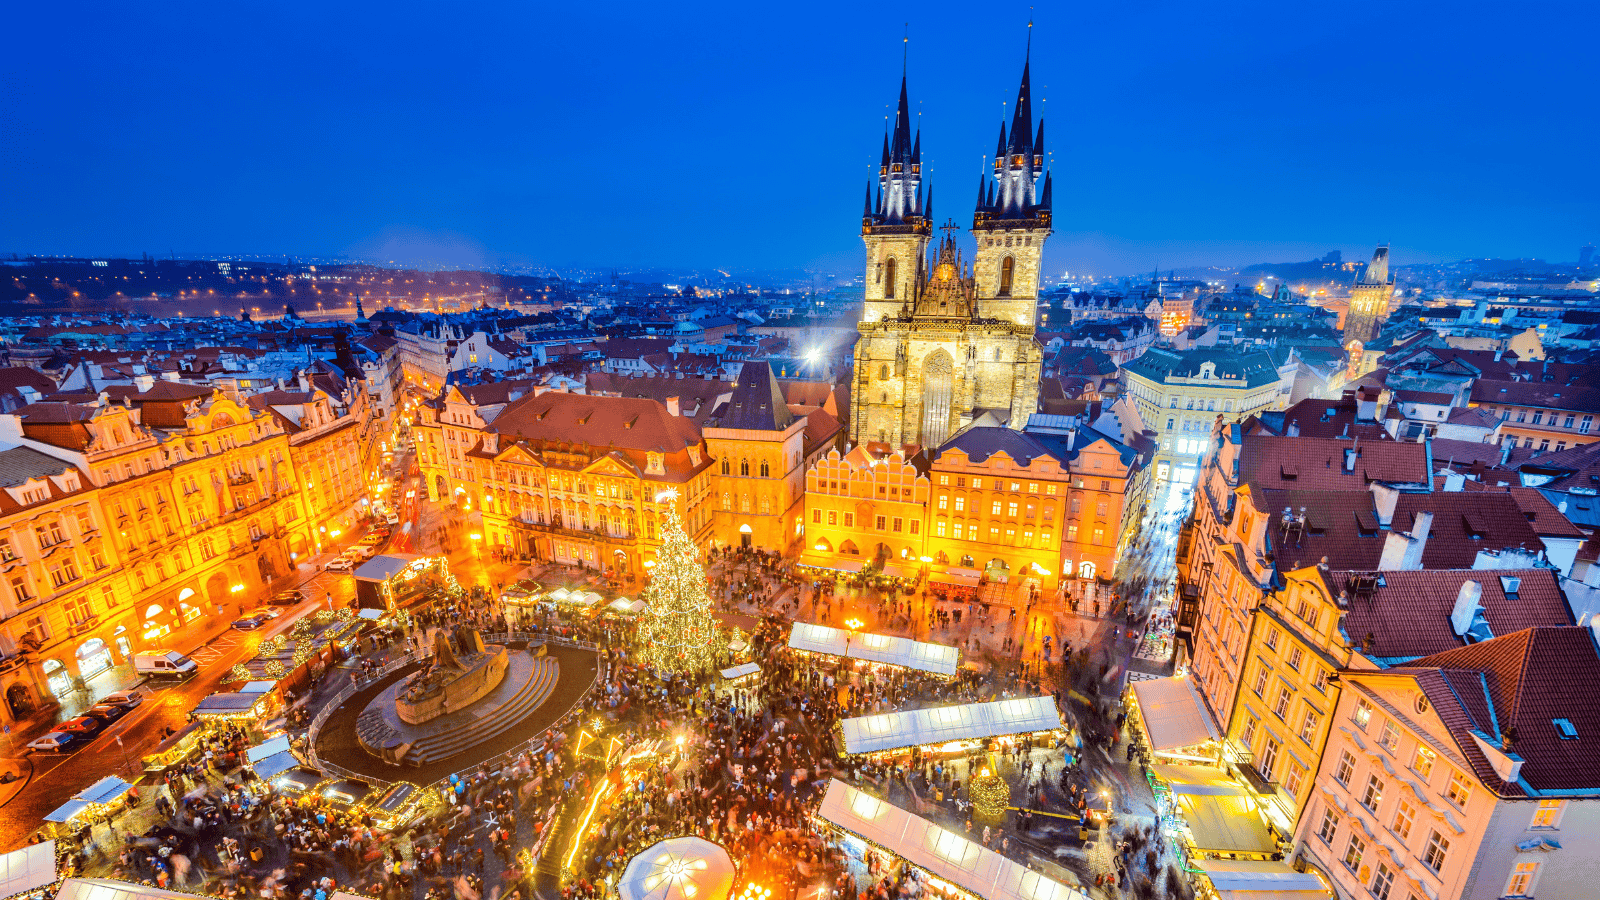 <p>Get into the holiday spirit with a December vacation to the Czech Republic. Prague, the capital city, is world-famous for its festive winter markets and events. Budget travelers can save by focusing their time on charming villages and historical sites found throughout the country. Consider flying into Prague before escaping the hustle and bustle in favor of smaller and more affordable cities like Brno and Olomouc.</p>